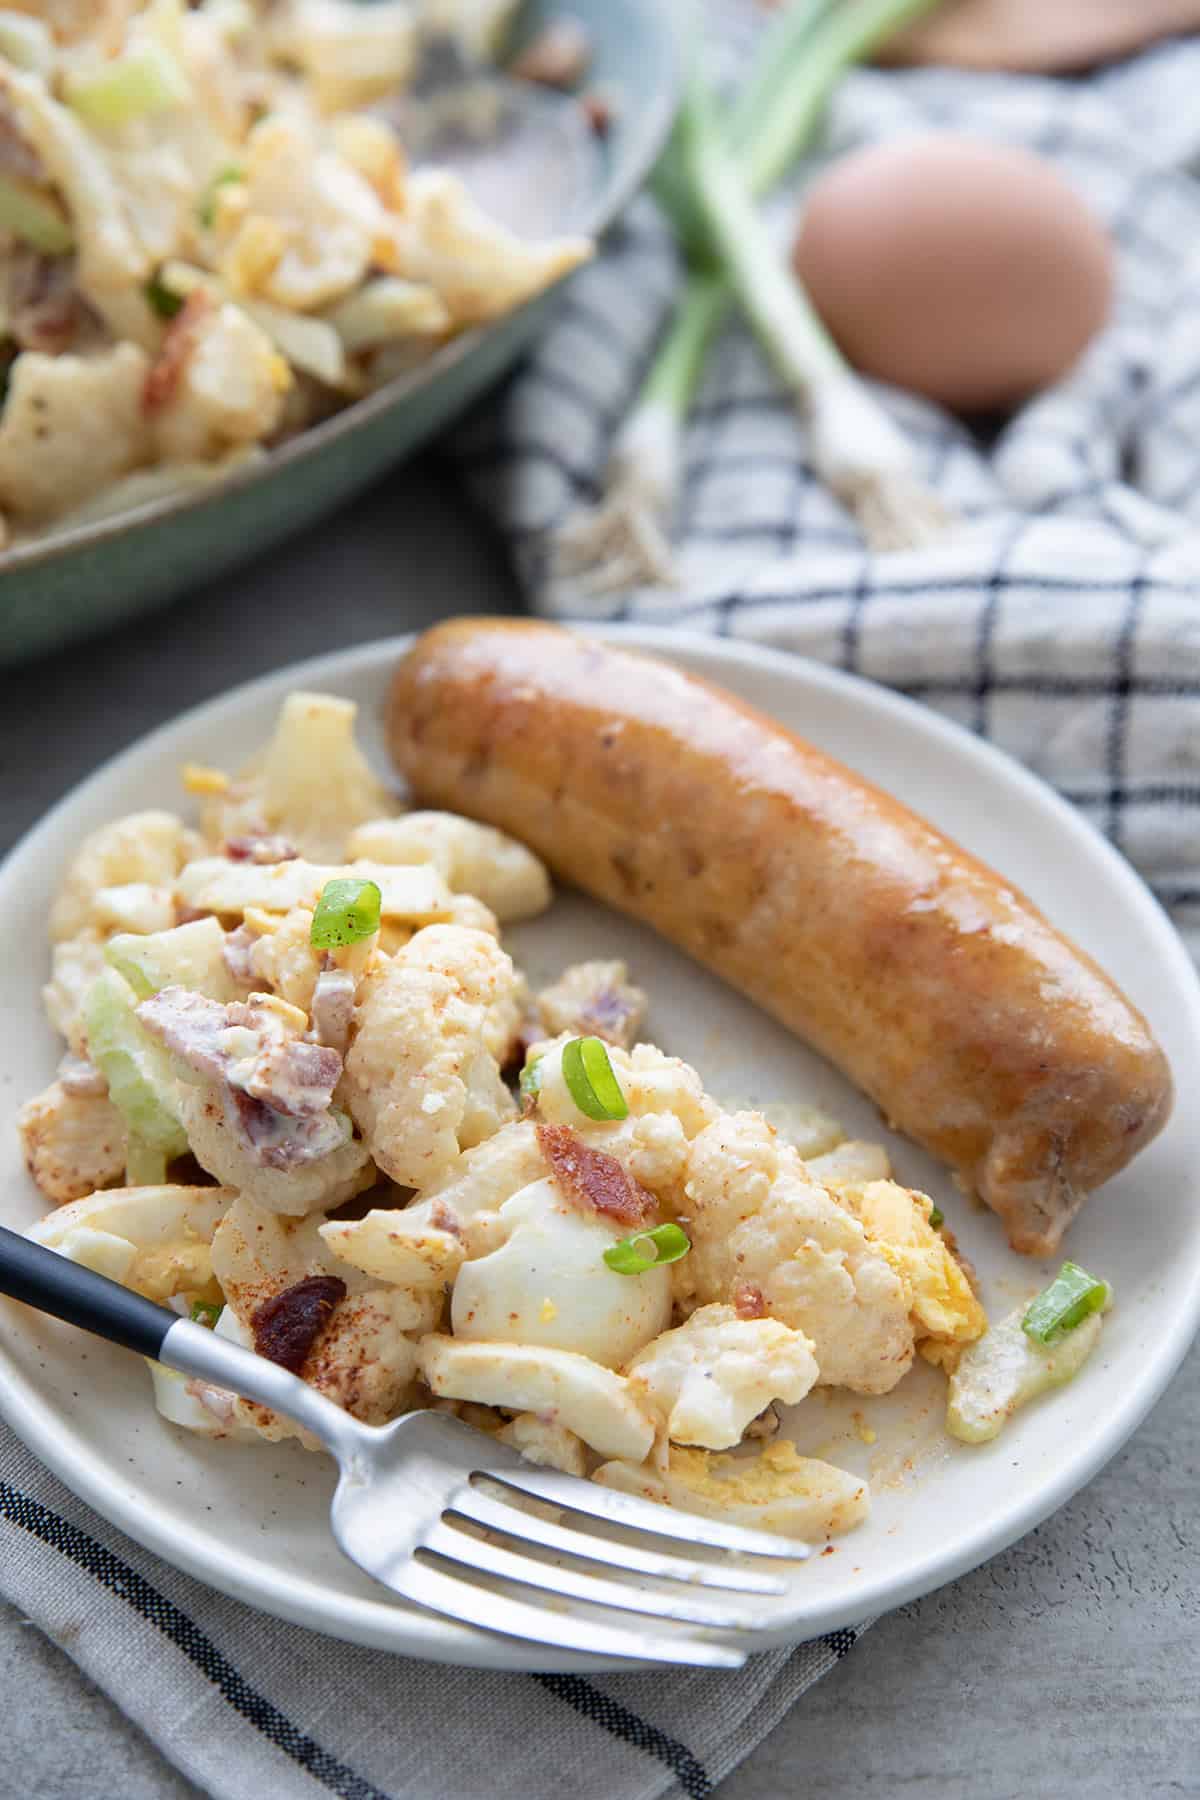 Cauliflower salad on a plate with a grilled sausage and a fork.